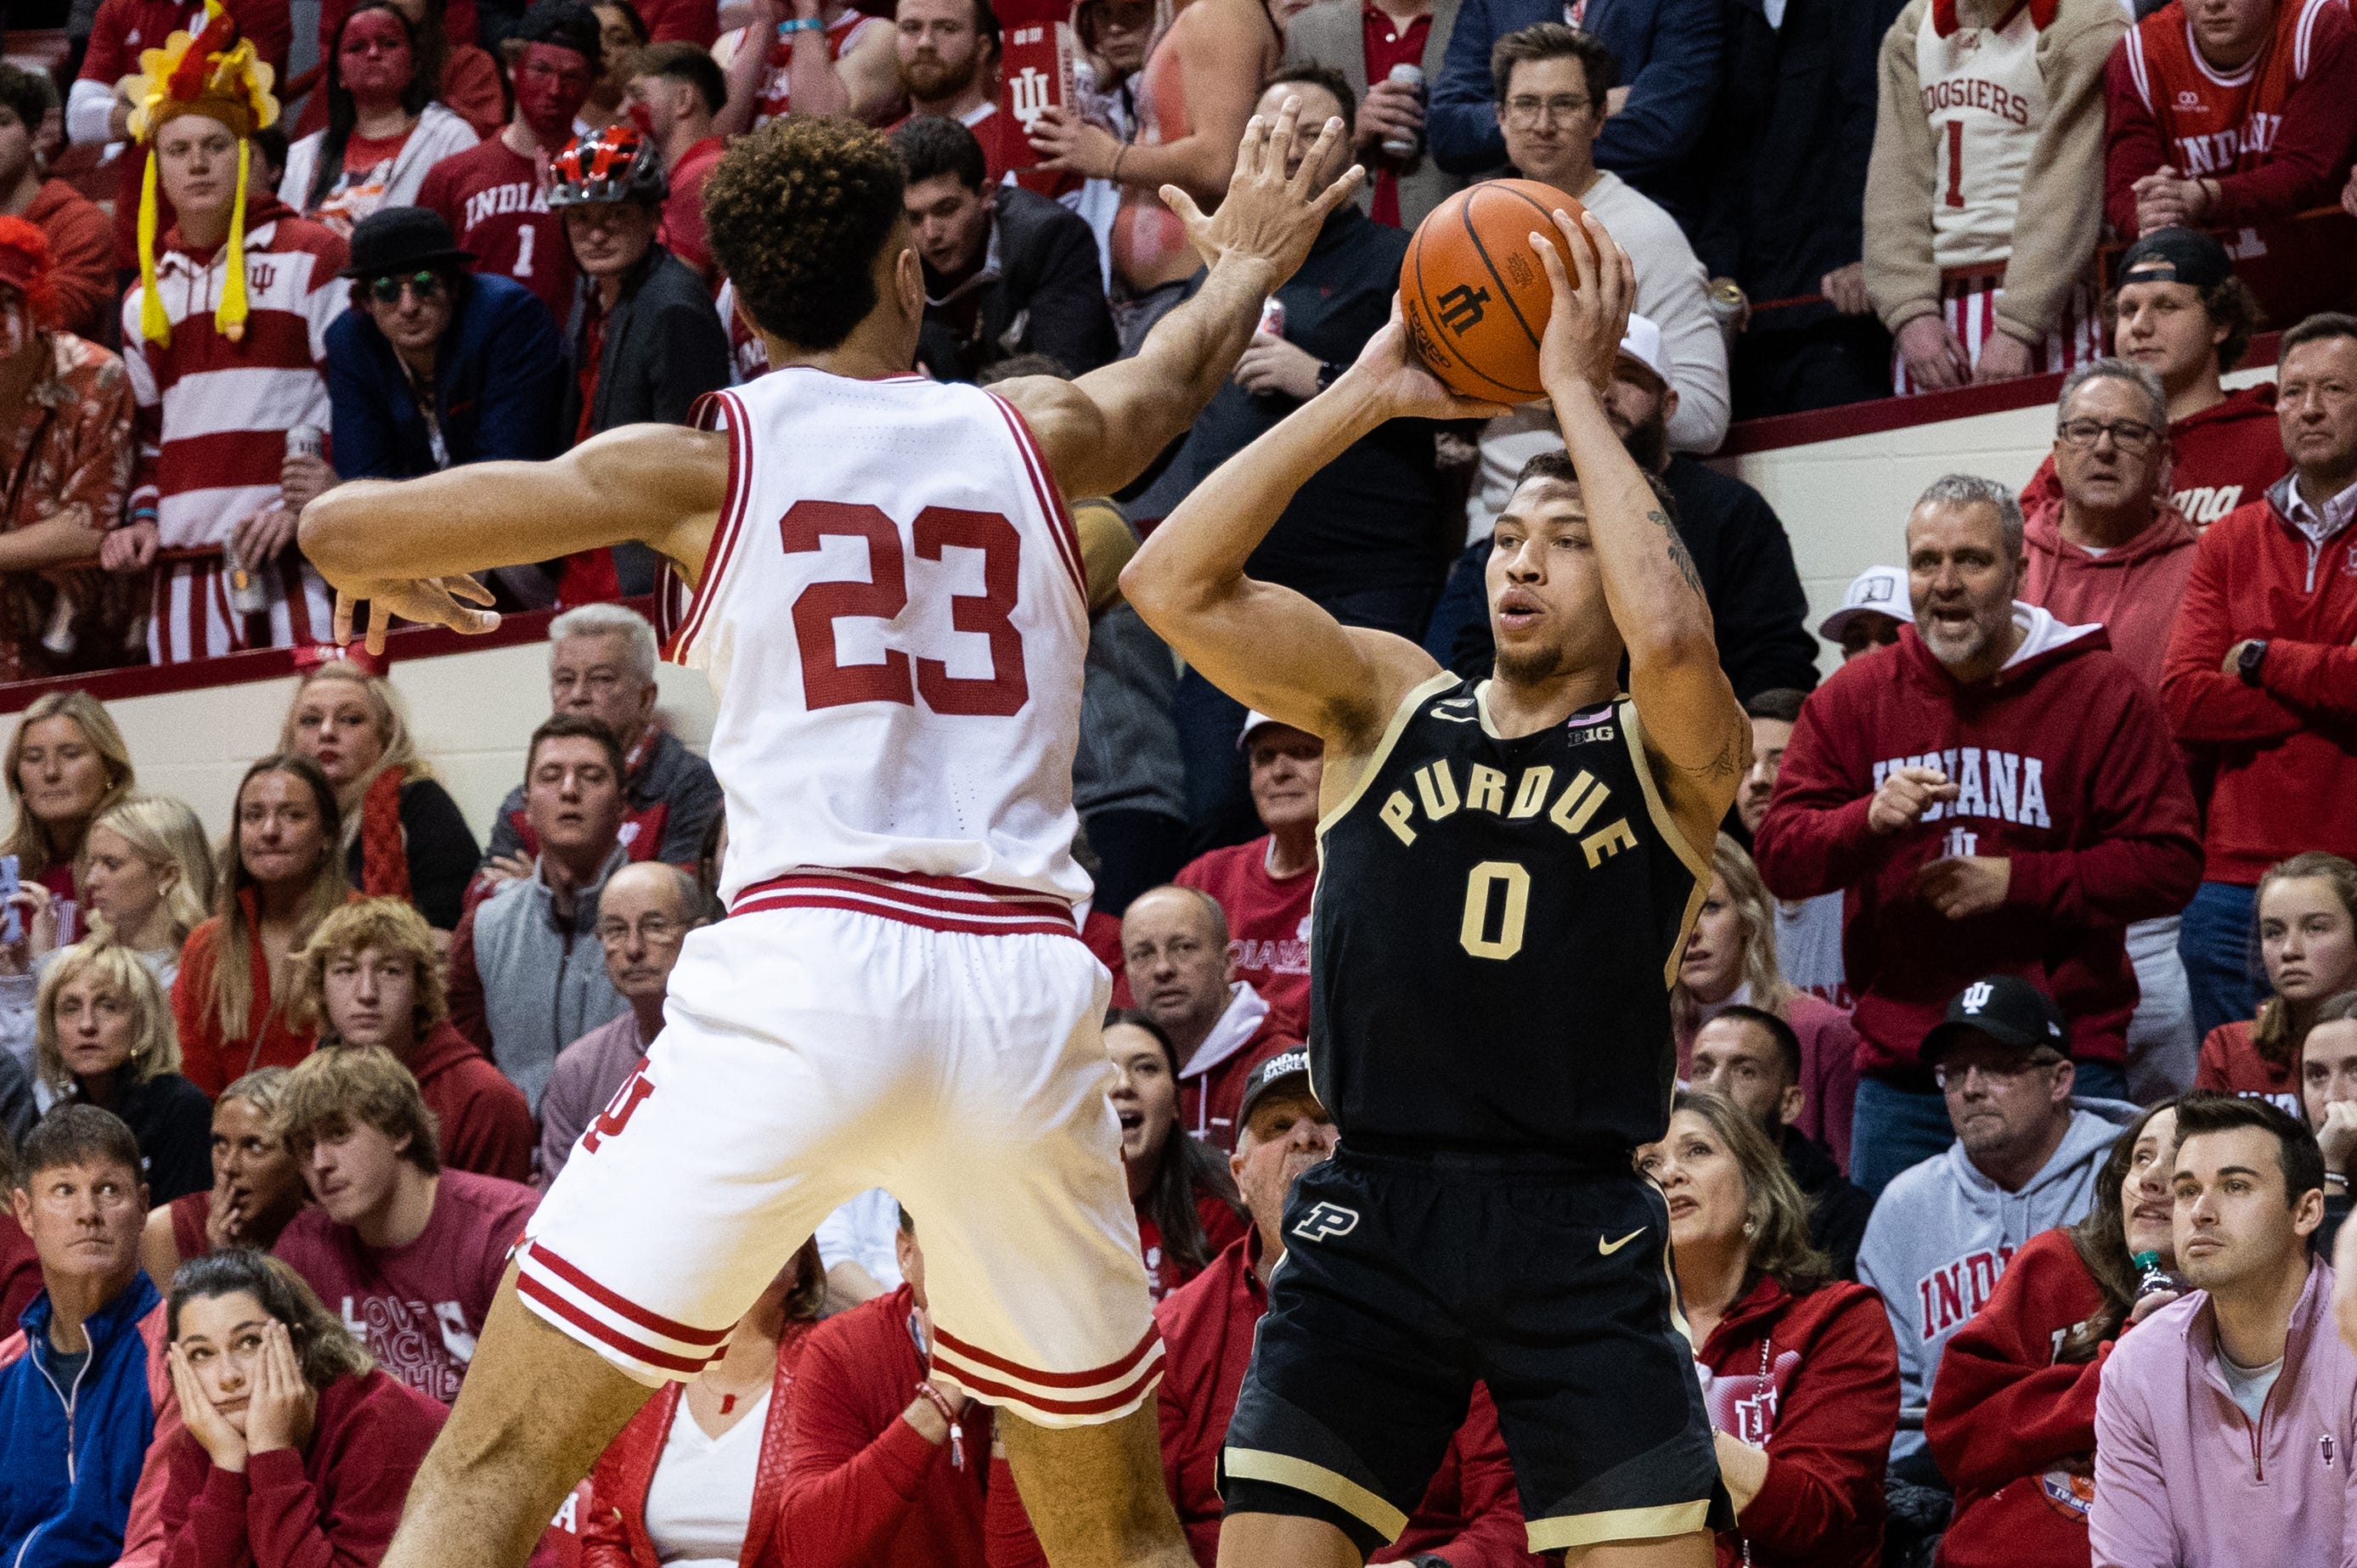 Even after loss, Purdue remains No. 1 ahead of Houston in USA TODAY Sports men's basketball poll